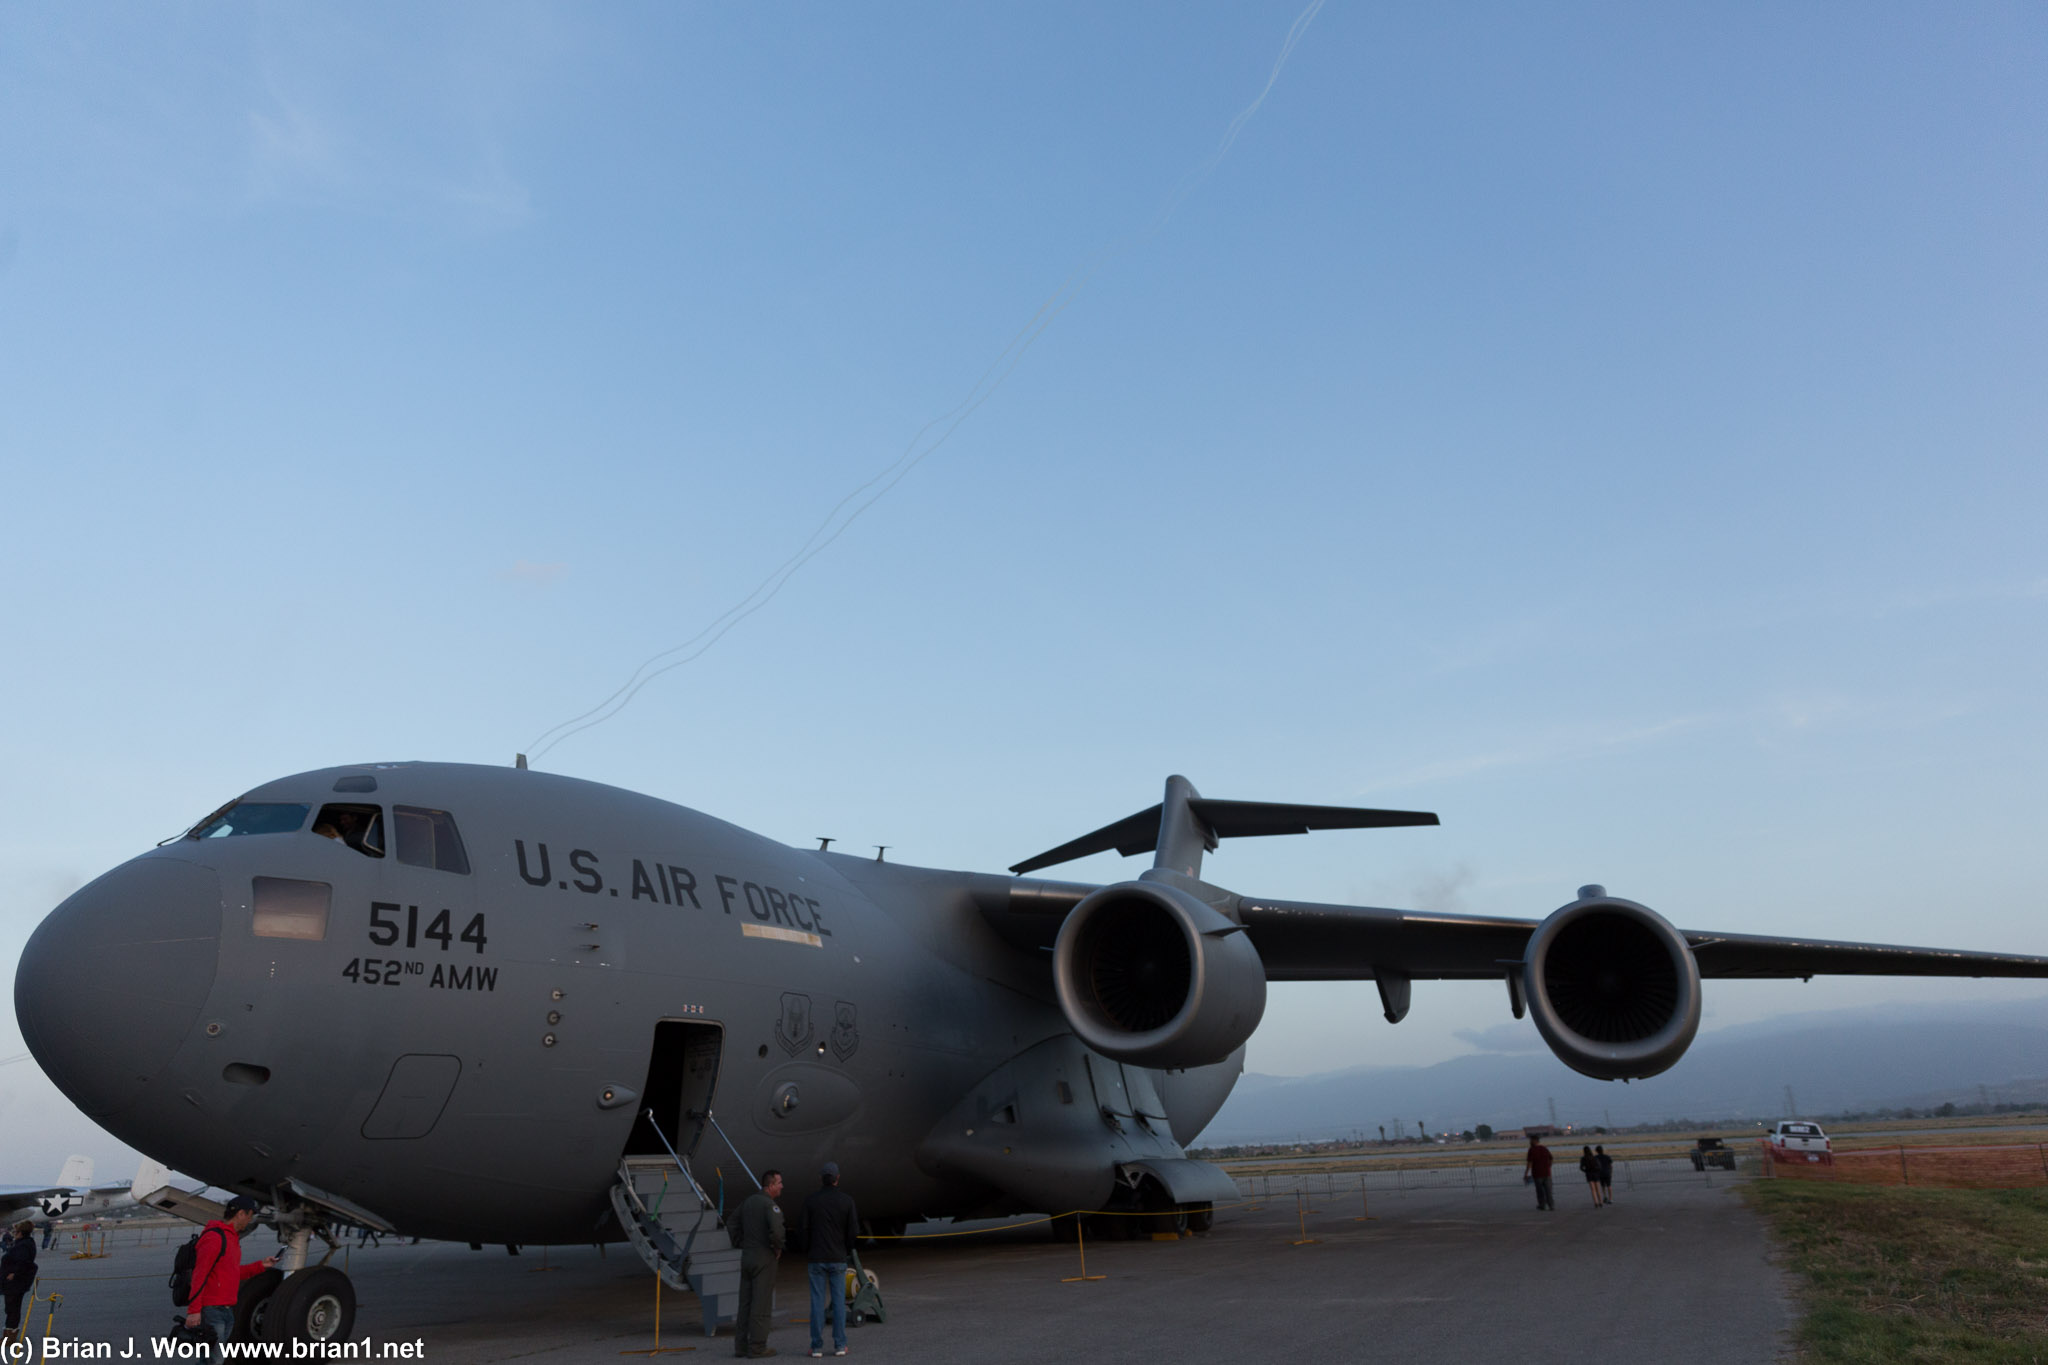 USAF Boeing C-17 Globemaster III from nearby March Air Reserve Base.